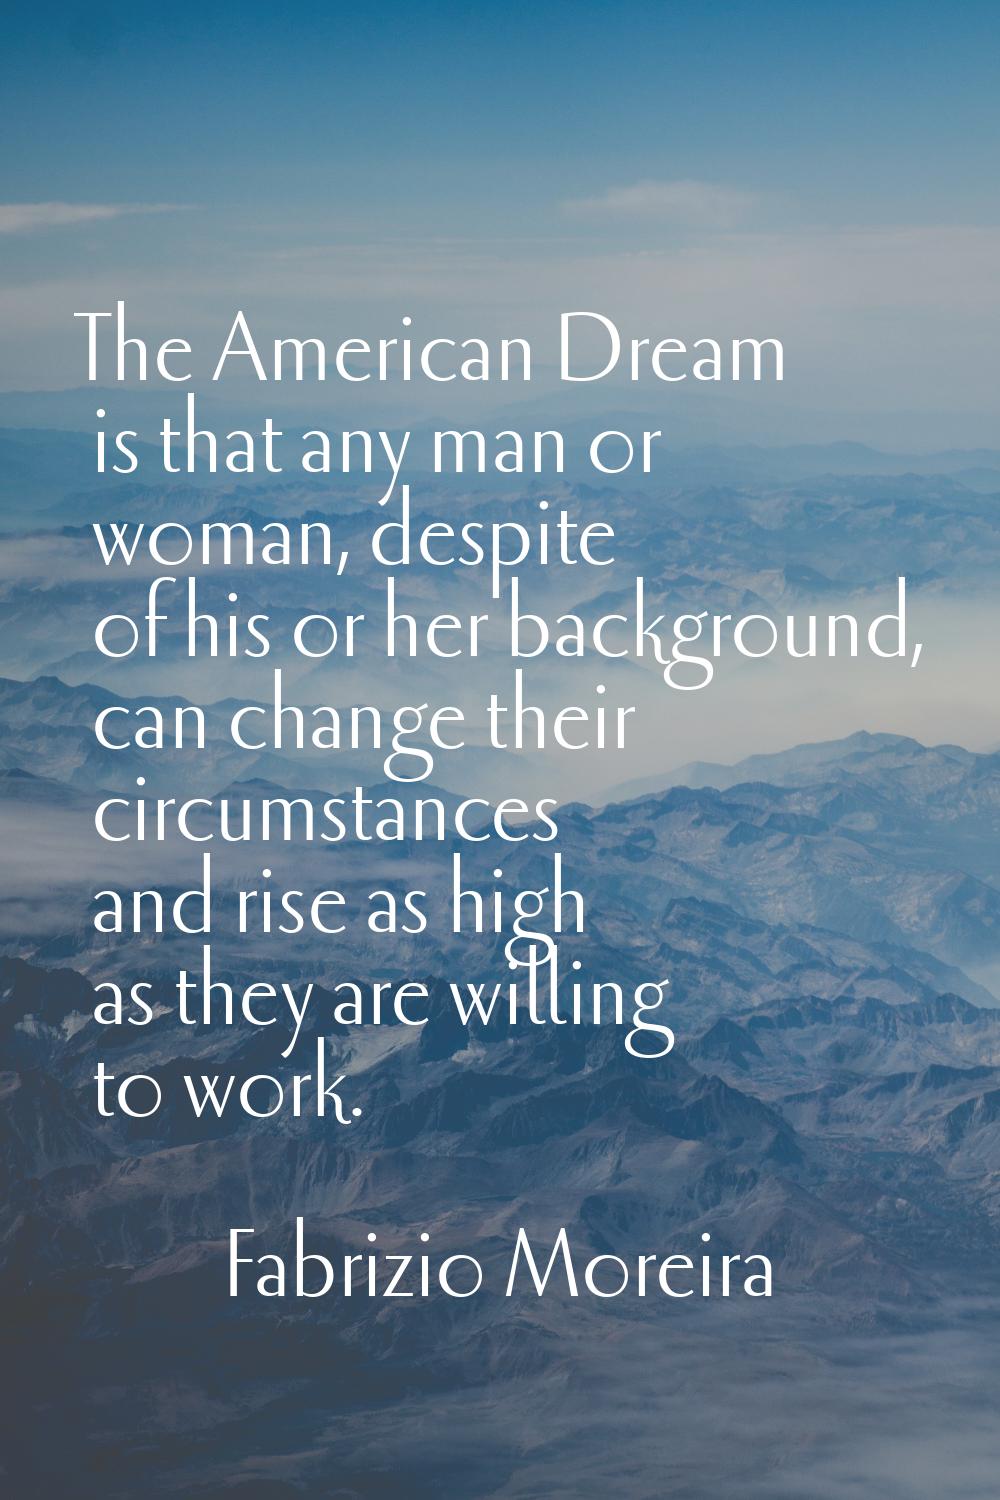 The American Dream is that any man or woman, despite of his or her background, can change their cir